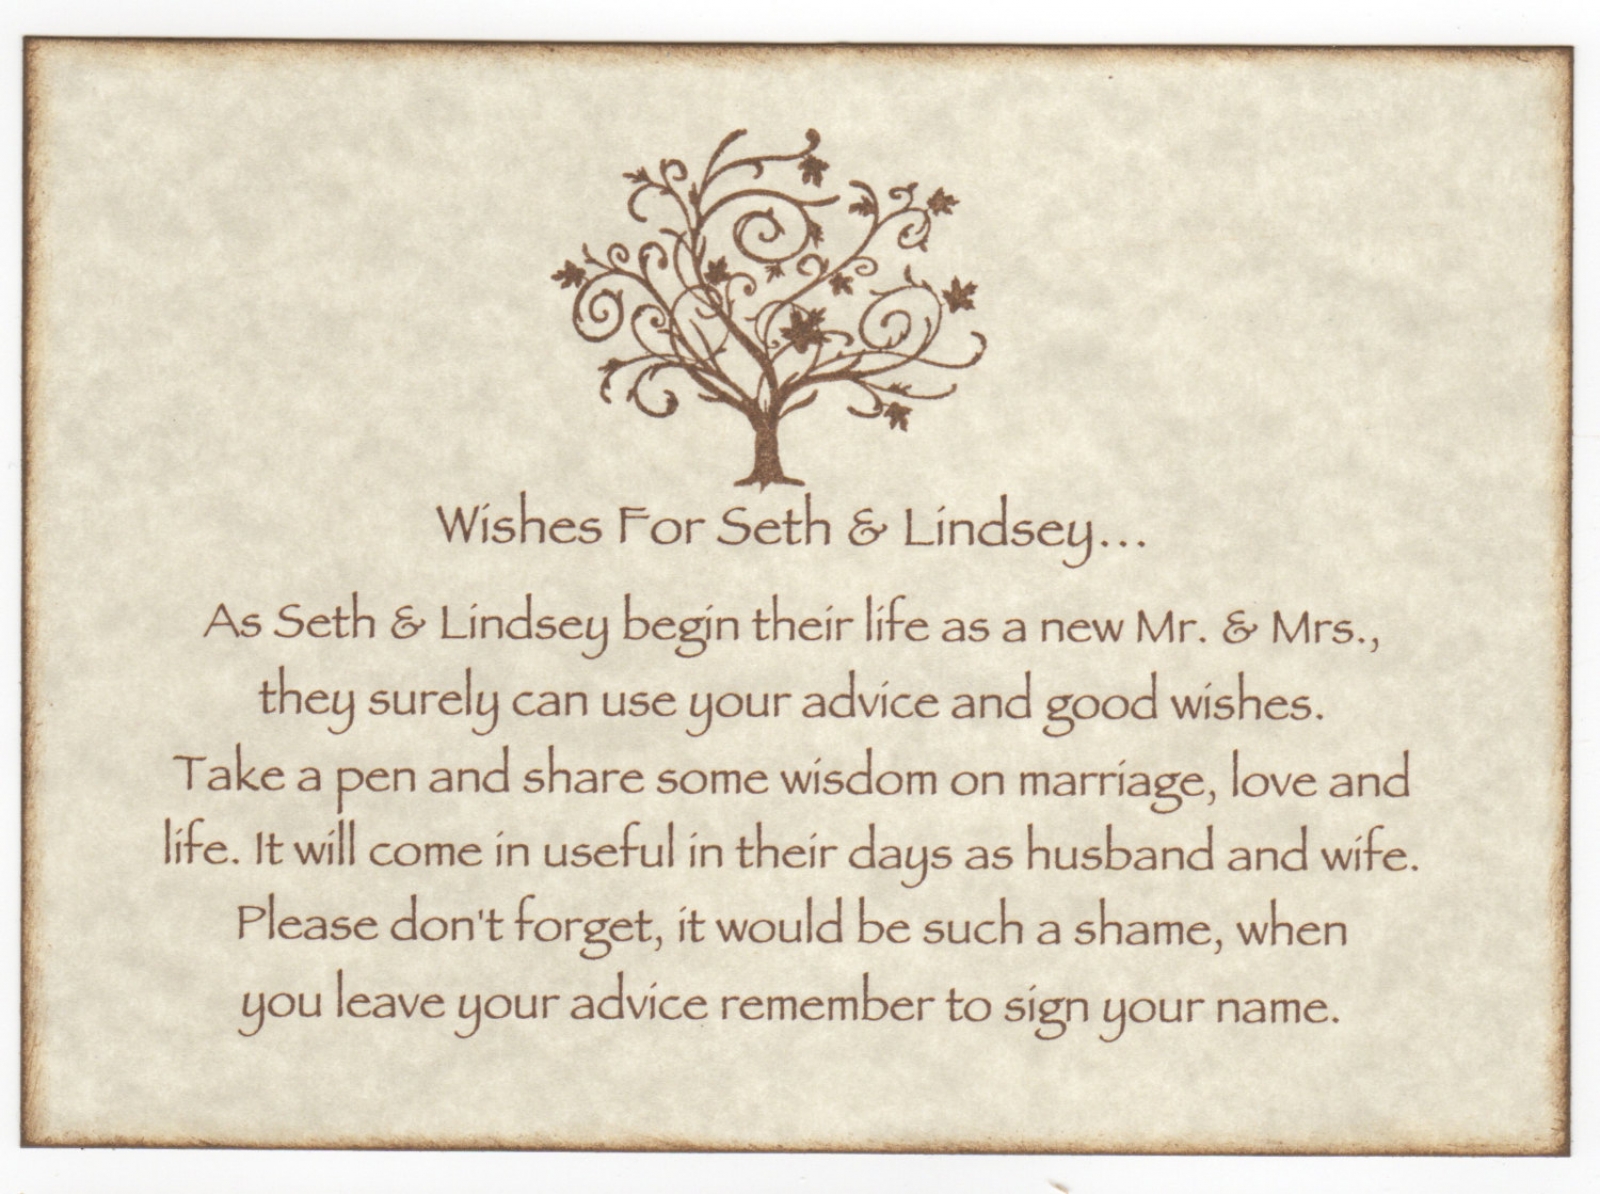 Personalized Marriage Wish Cards Advice and Wishes for the Bride and Groom 